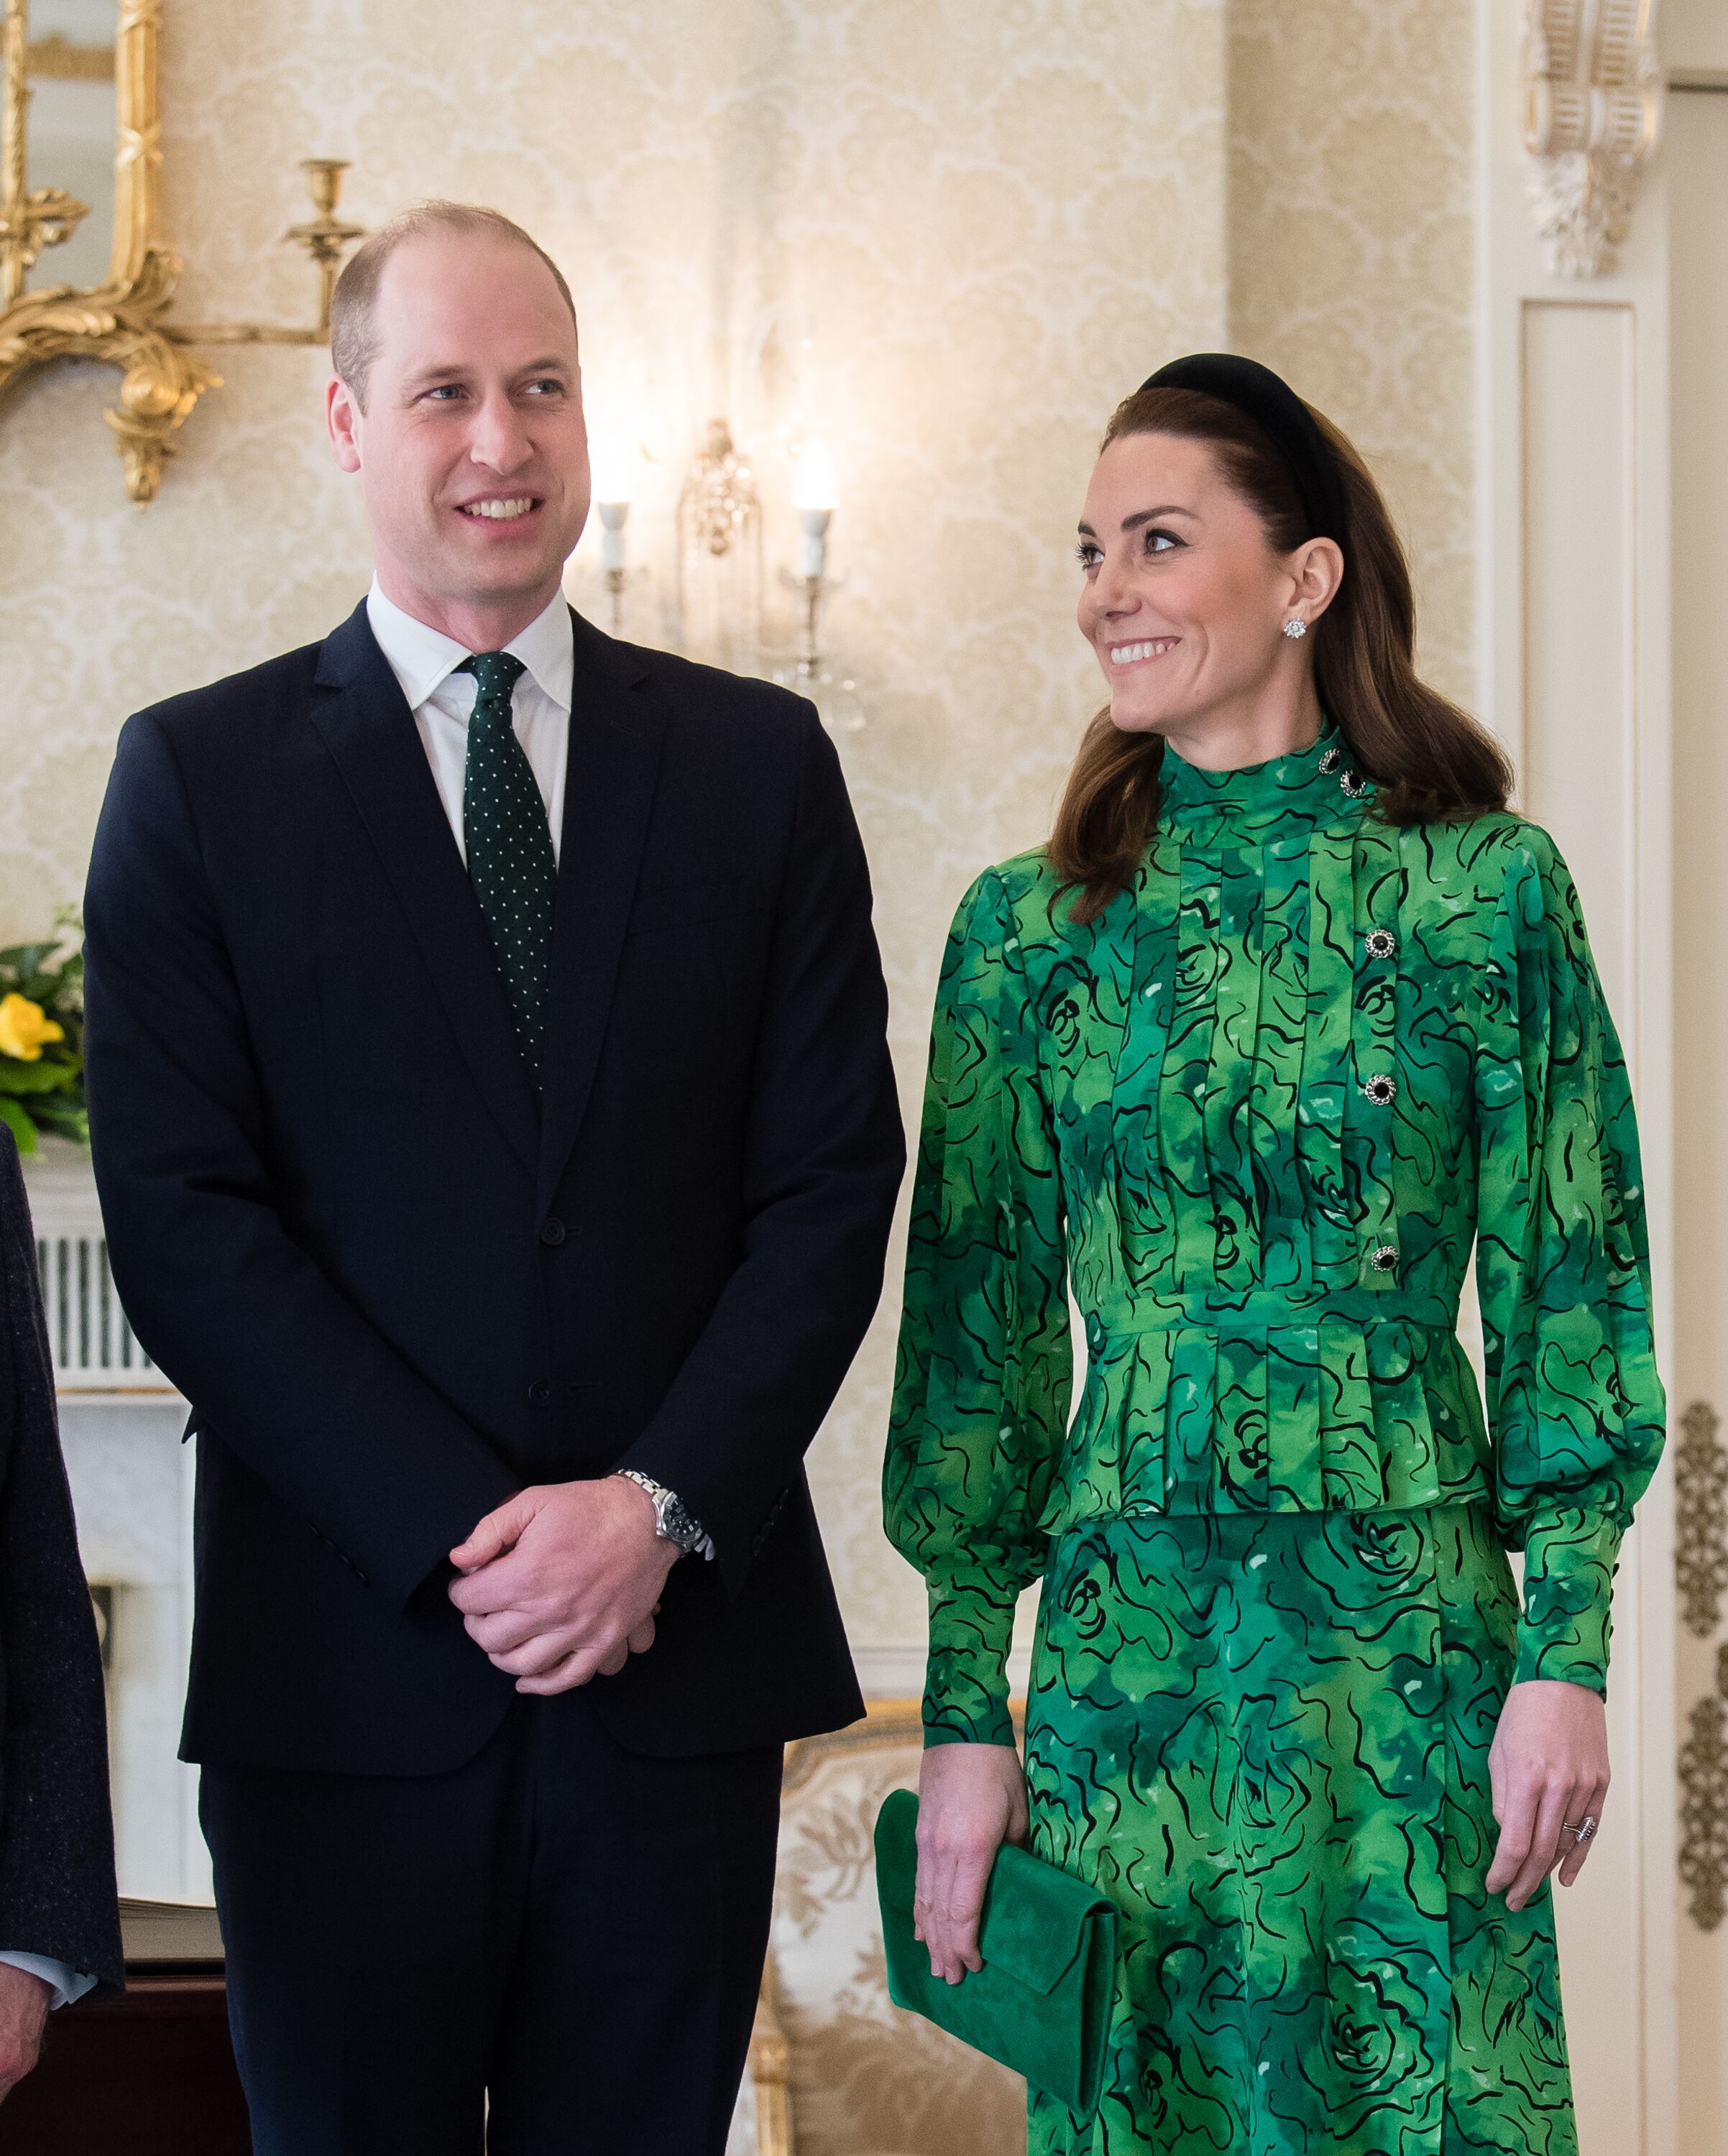 Catherine, Duchess of Cambridge and Prince William, Duke of Cambridge attend a meeting with the President of Ireland at Áras an Uachtaráin on March 03, 2020 | Photo: Getty Images